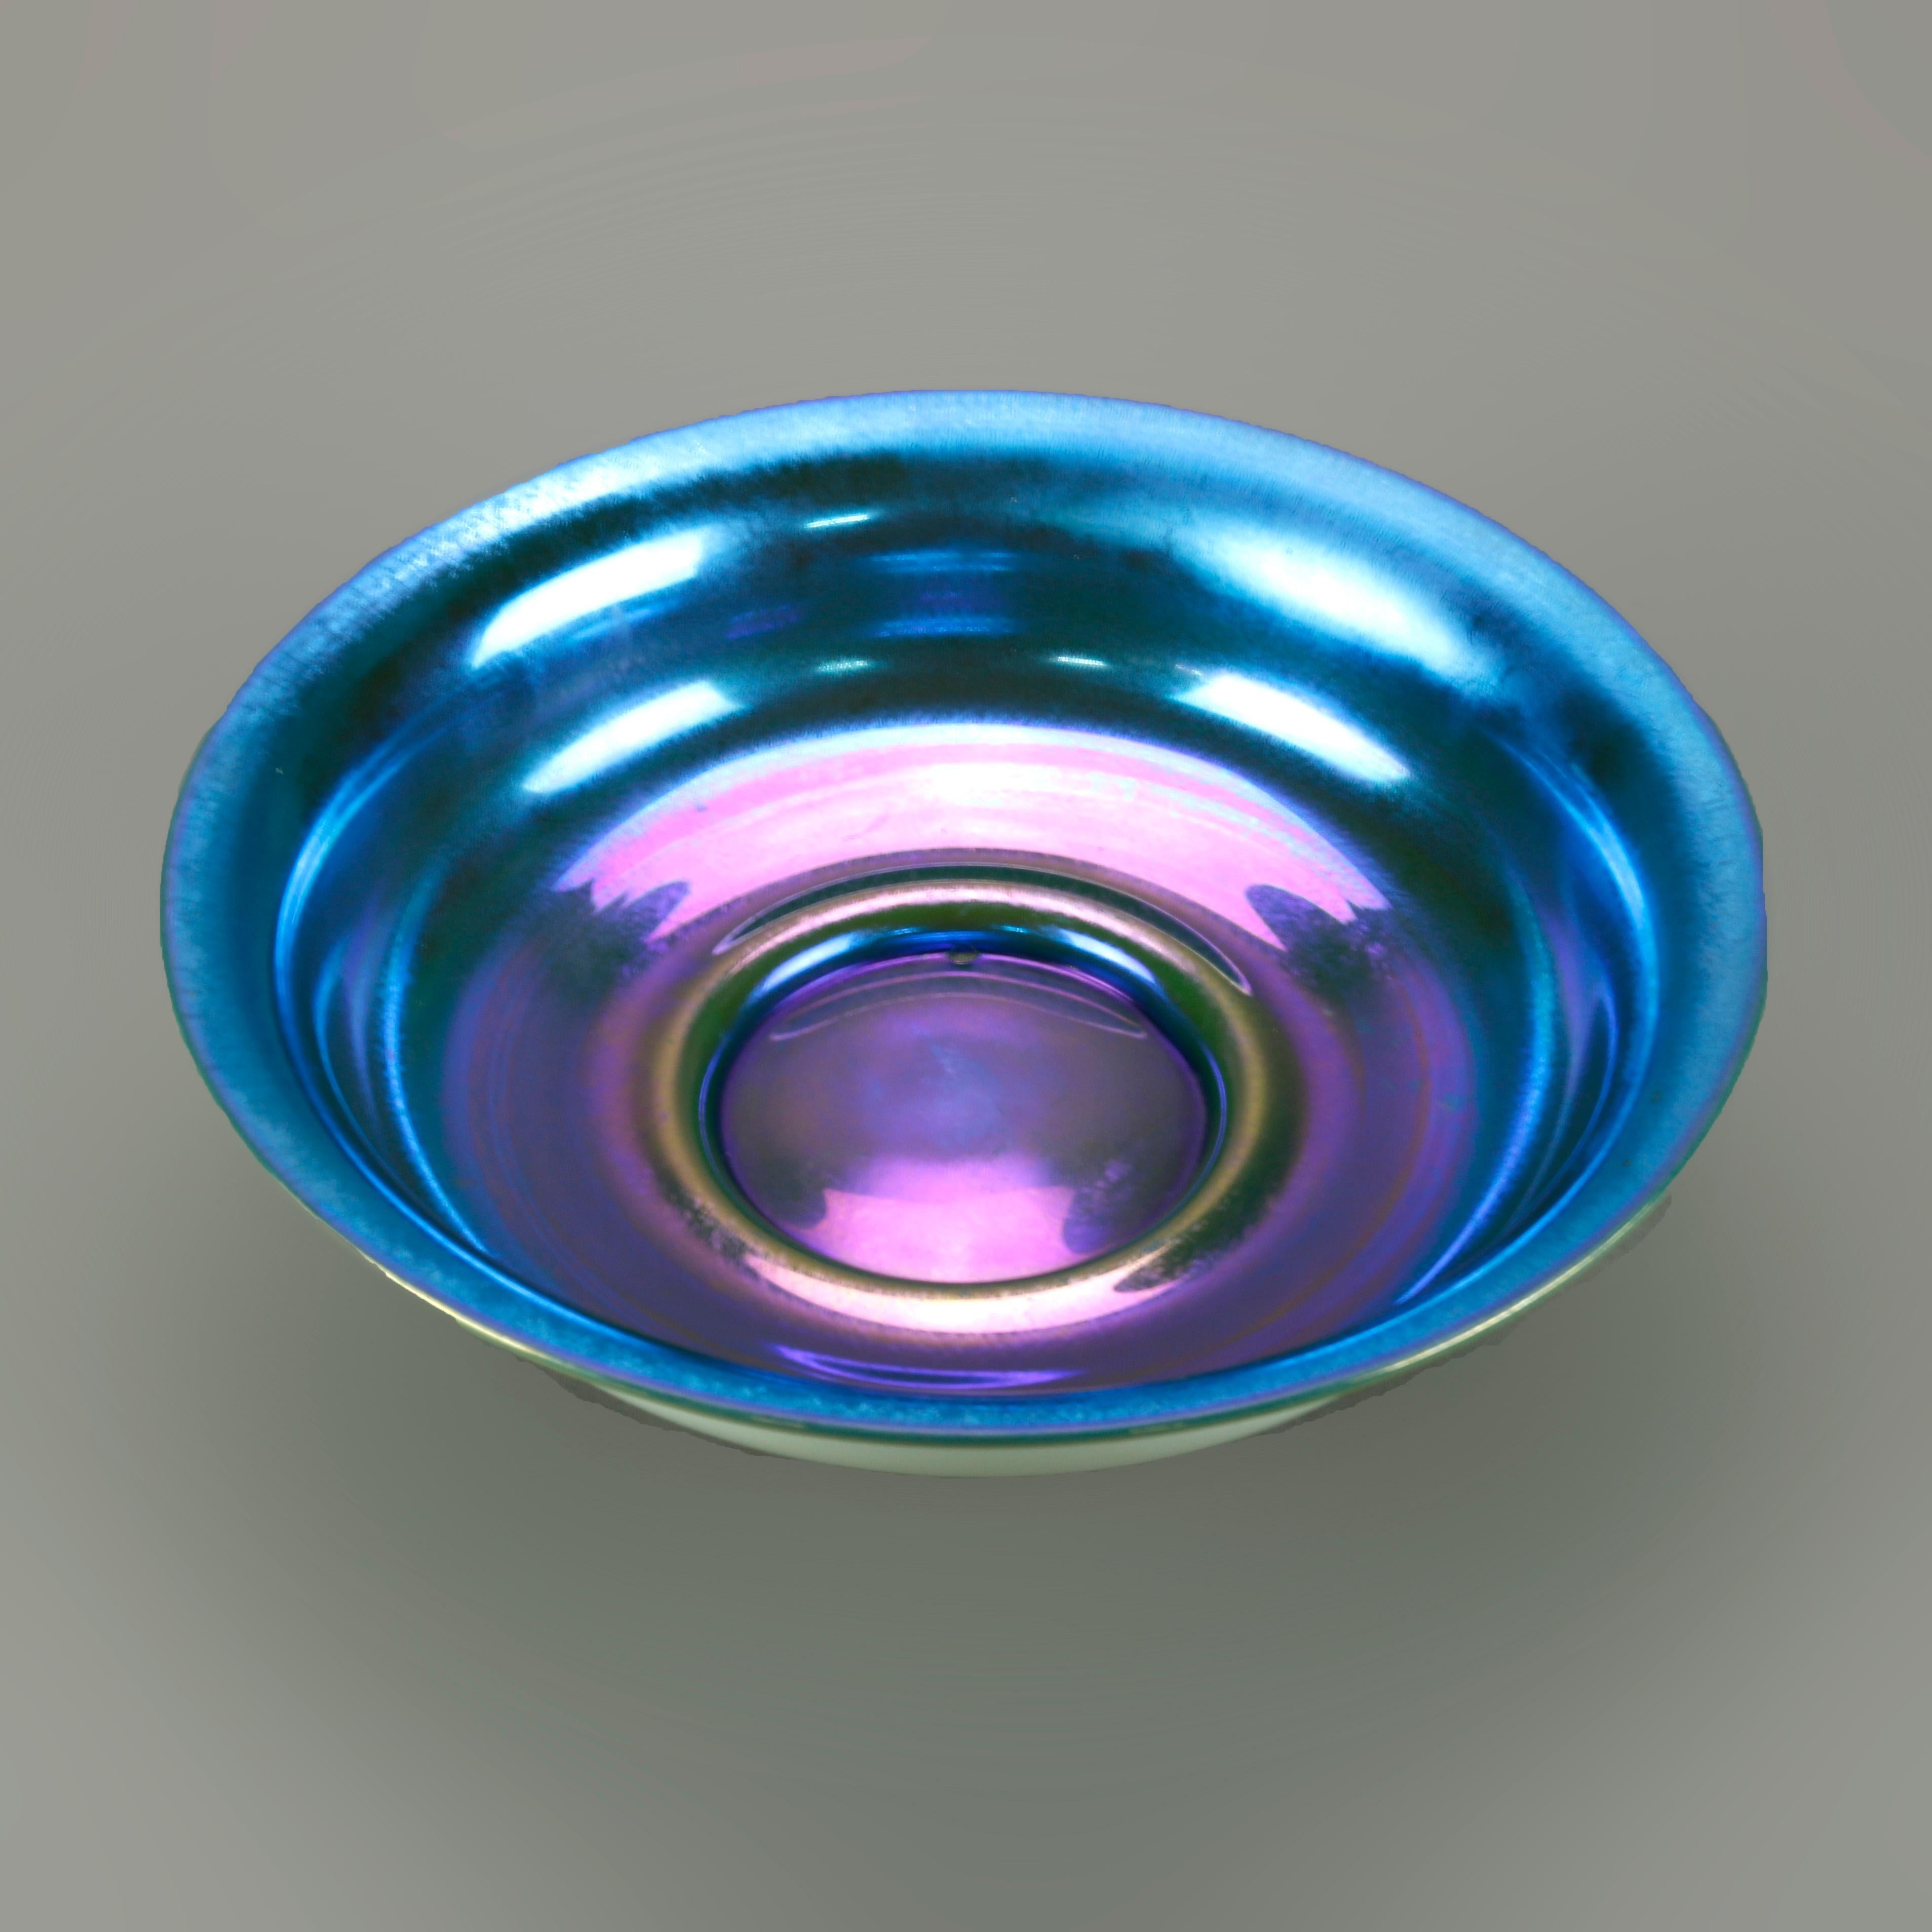 An antique blue aurene an calcite art glass bowl in the manner of Steuben offers round form with flared lip, unsigned, c1920

Measures - 2.5''H x 10.25''W x 10.25''D.